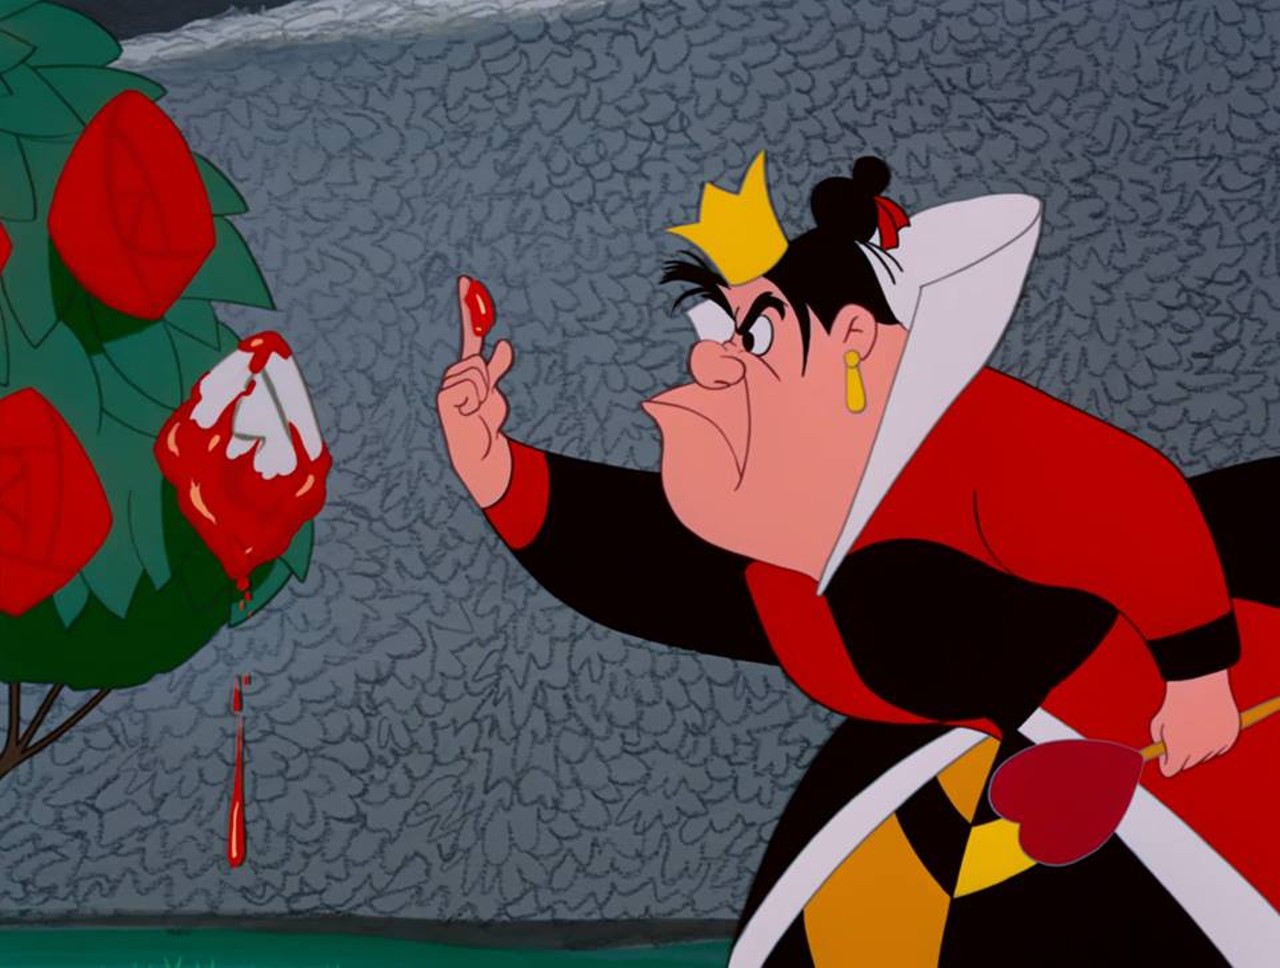 Queen of Hearts, Alice in Wonderland (1951)
Ruling with an iron fist and a catchphrase that would make anyone tremble in fear, the Queen of Hearts is sweet one moment and then has an outburst the next often involving a beheading. That’s basically all of our abuelas when she sees that we didn’t clean our plate or didn’t ask for a fourth round of tacos. Helena Bonham Carter brilliantly reprised the role in the live action remake, proving that The Queen of Heart's tyranny knows no bounds.
Photo via Disney’s Alice in Wonderland / Facebook